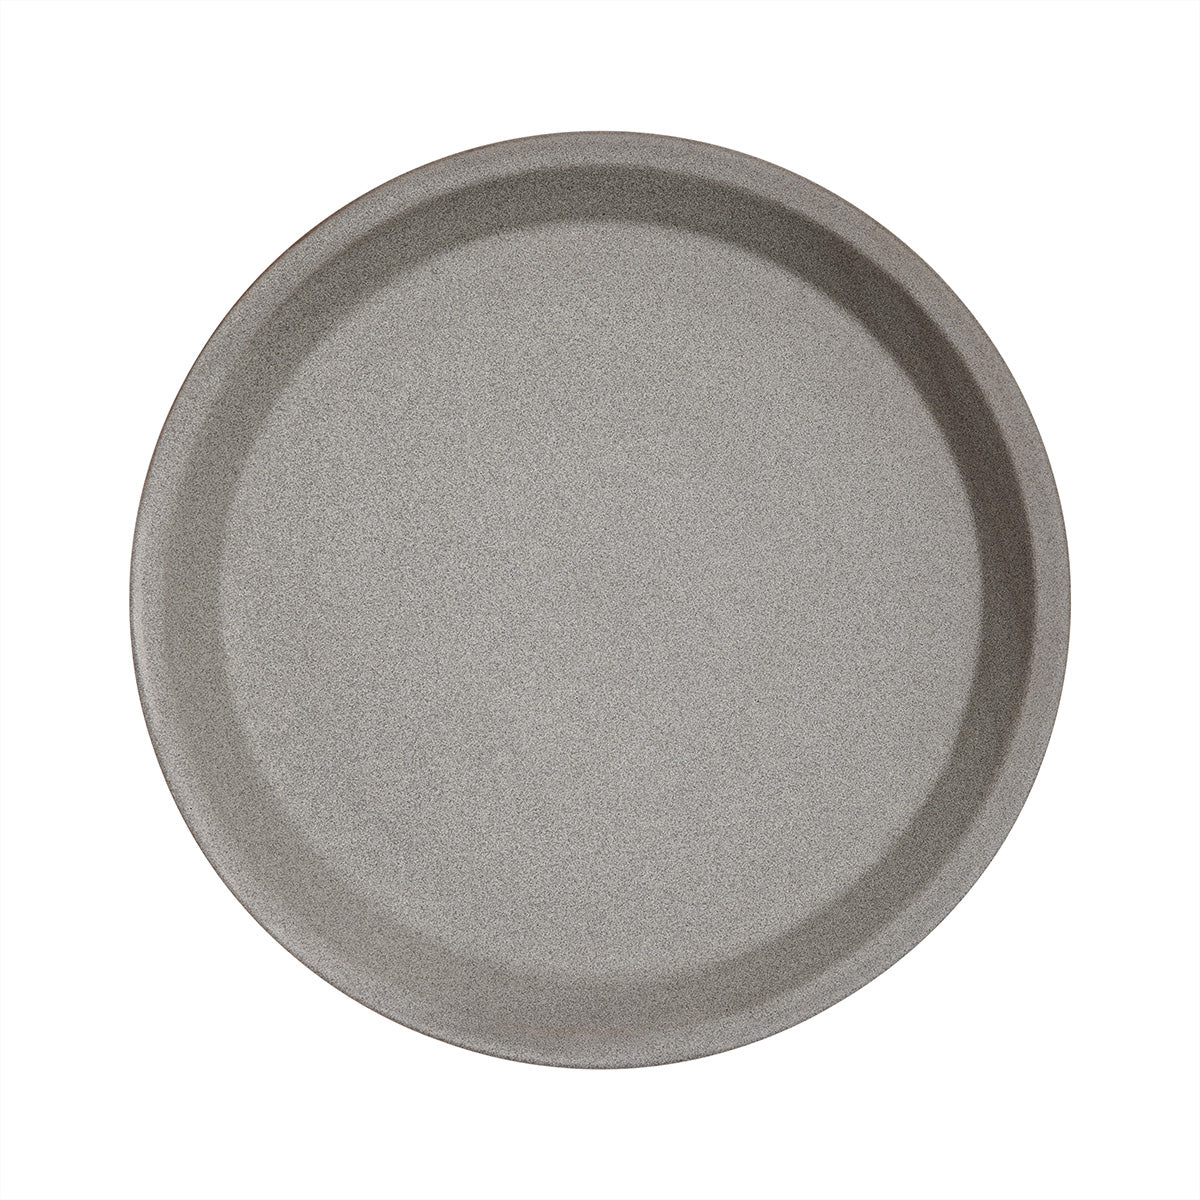 Oyoy Living Yuka Lunch Plate - Pack of 2